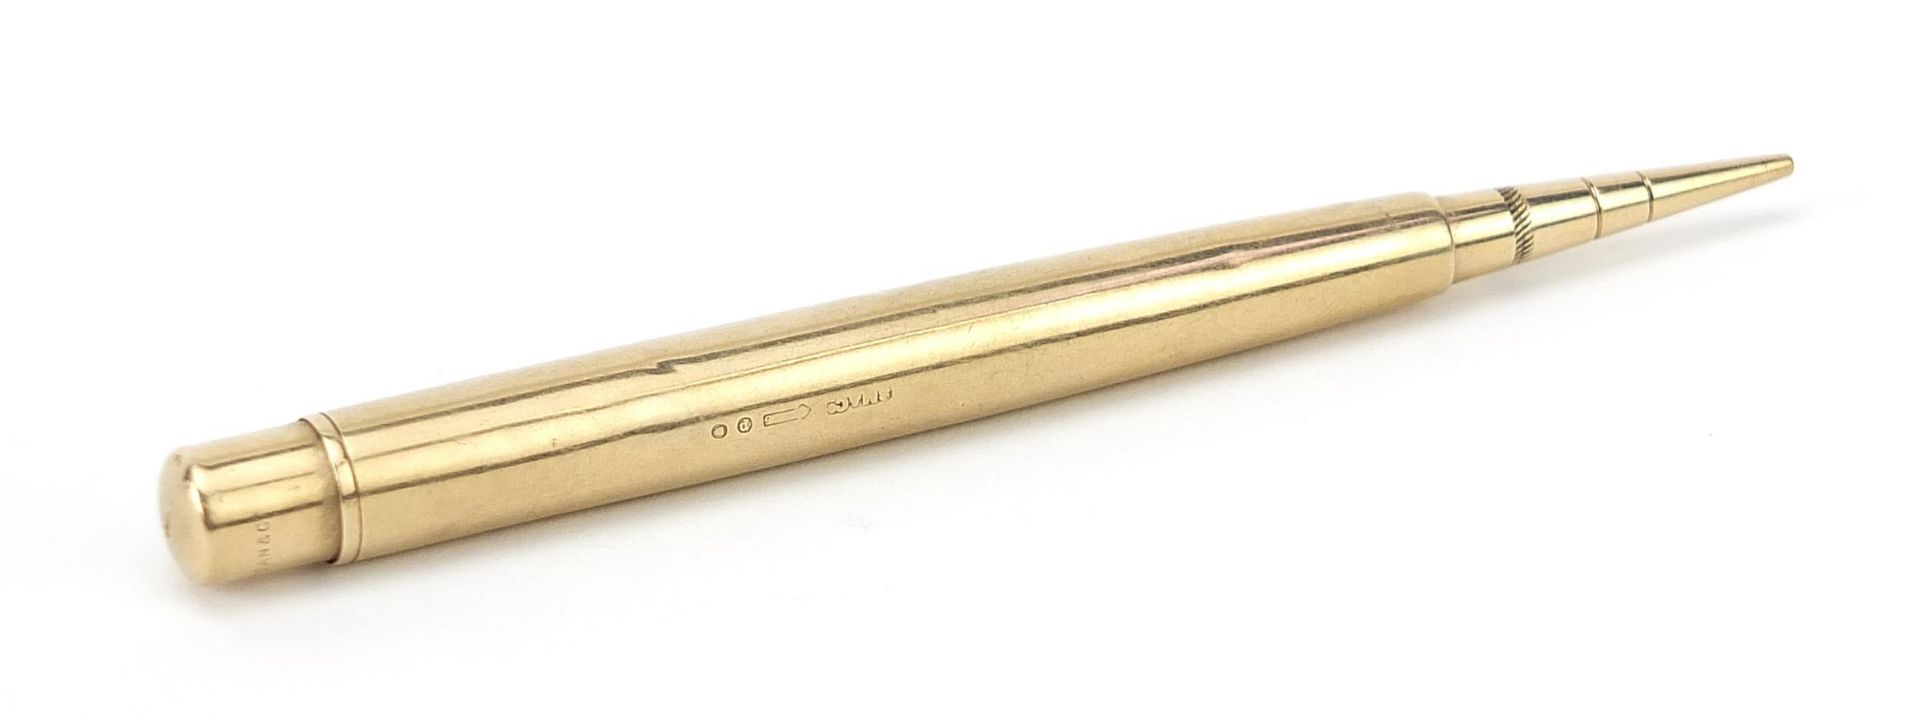 Sampson Mordan & Co, Edwardian 9ct gold cased propelling pencil, London 1930, 12.6cm in length, 31. - Image 2 of 5